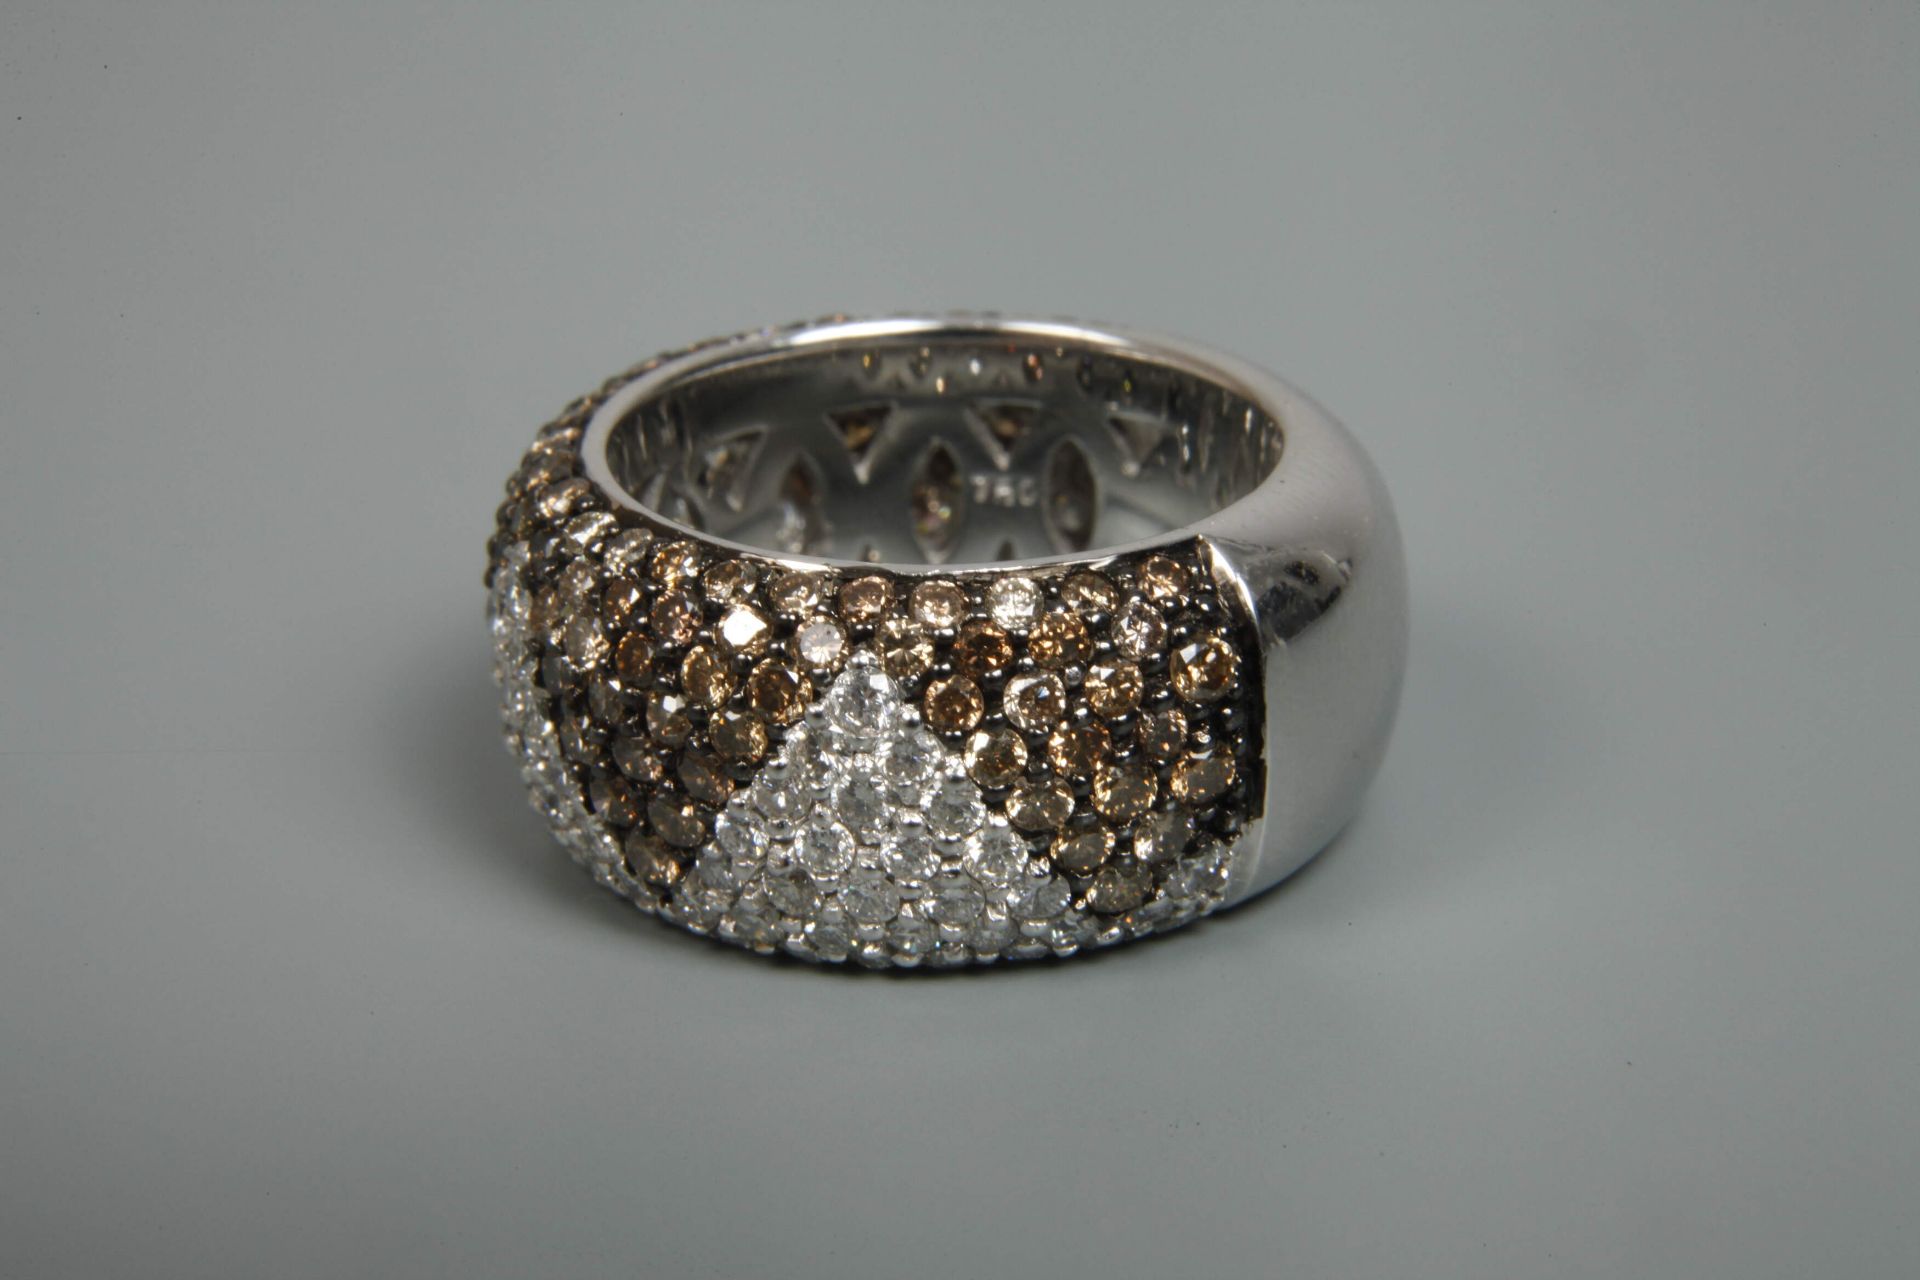 Lady's ring set with brilliant-cut diamonds - Image 2 of 3